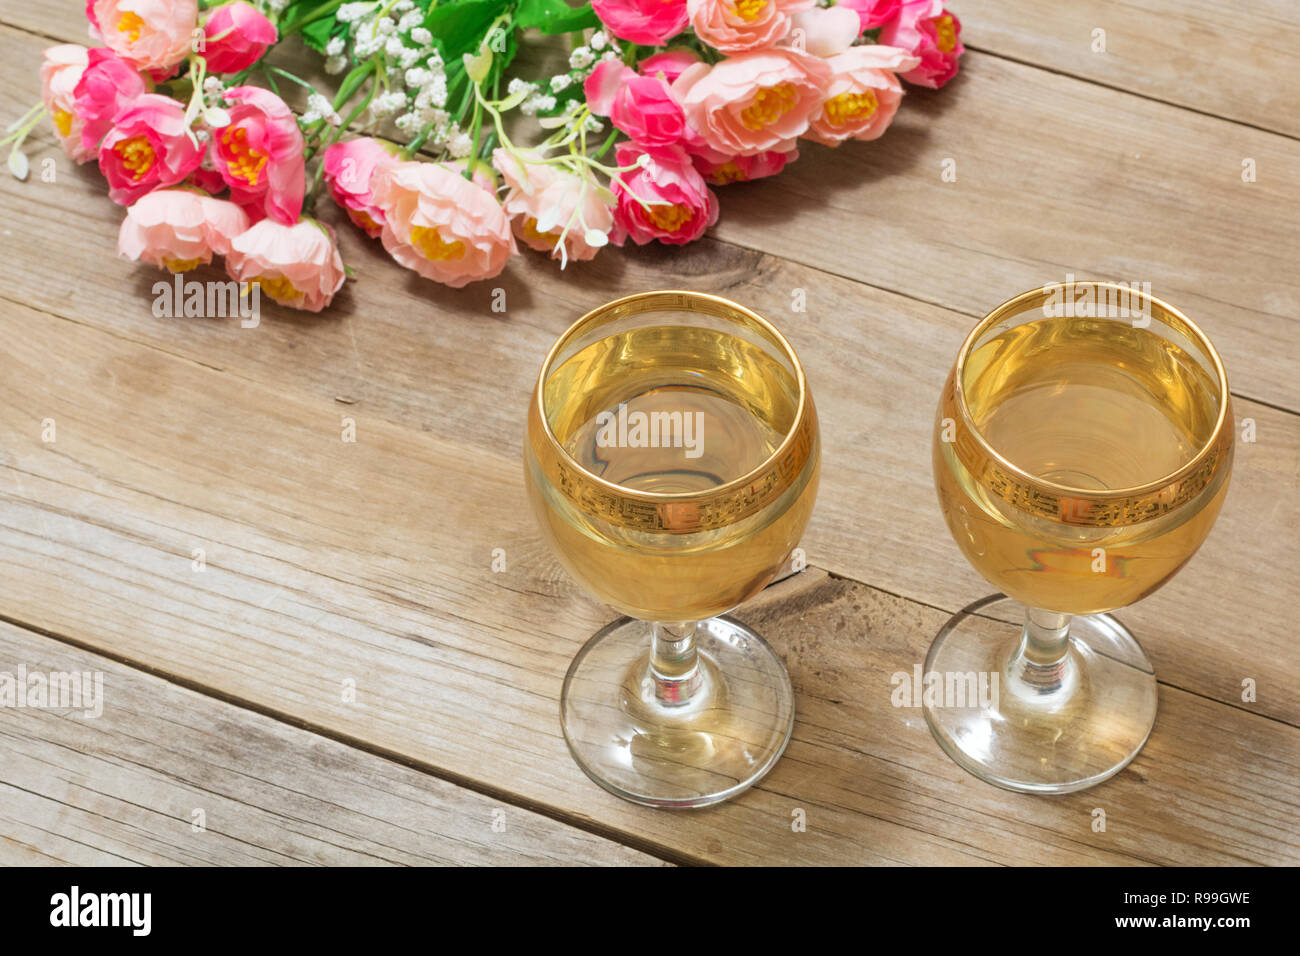 Two glasses of white wine and flowers Stock Photo